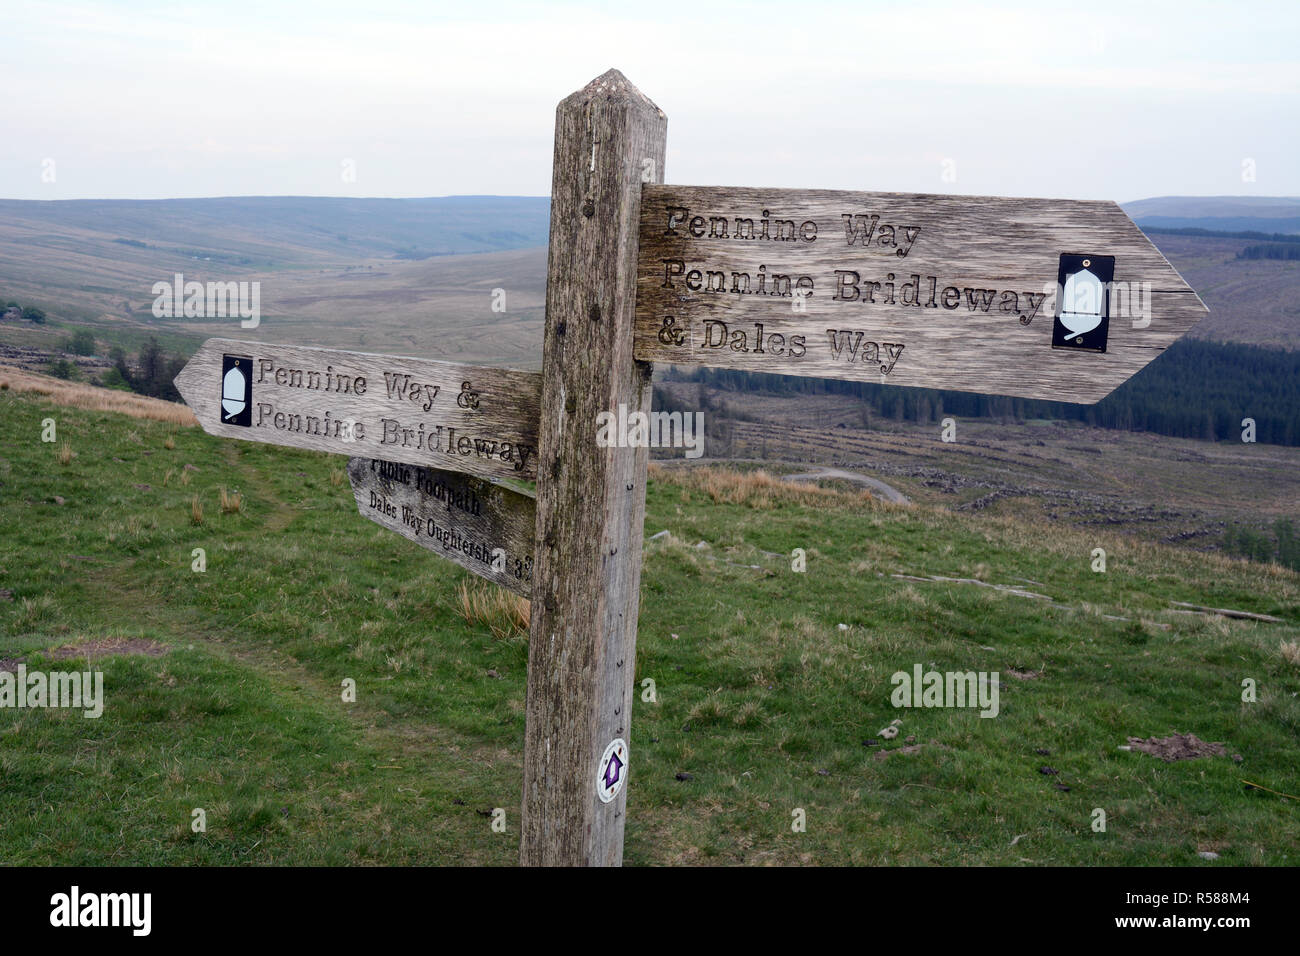 A sign indicating Dales Way and Pennine Way hiking routes, where both trails overlap, in Yorkshire, England, United Kingdom. Stock Photo